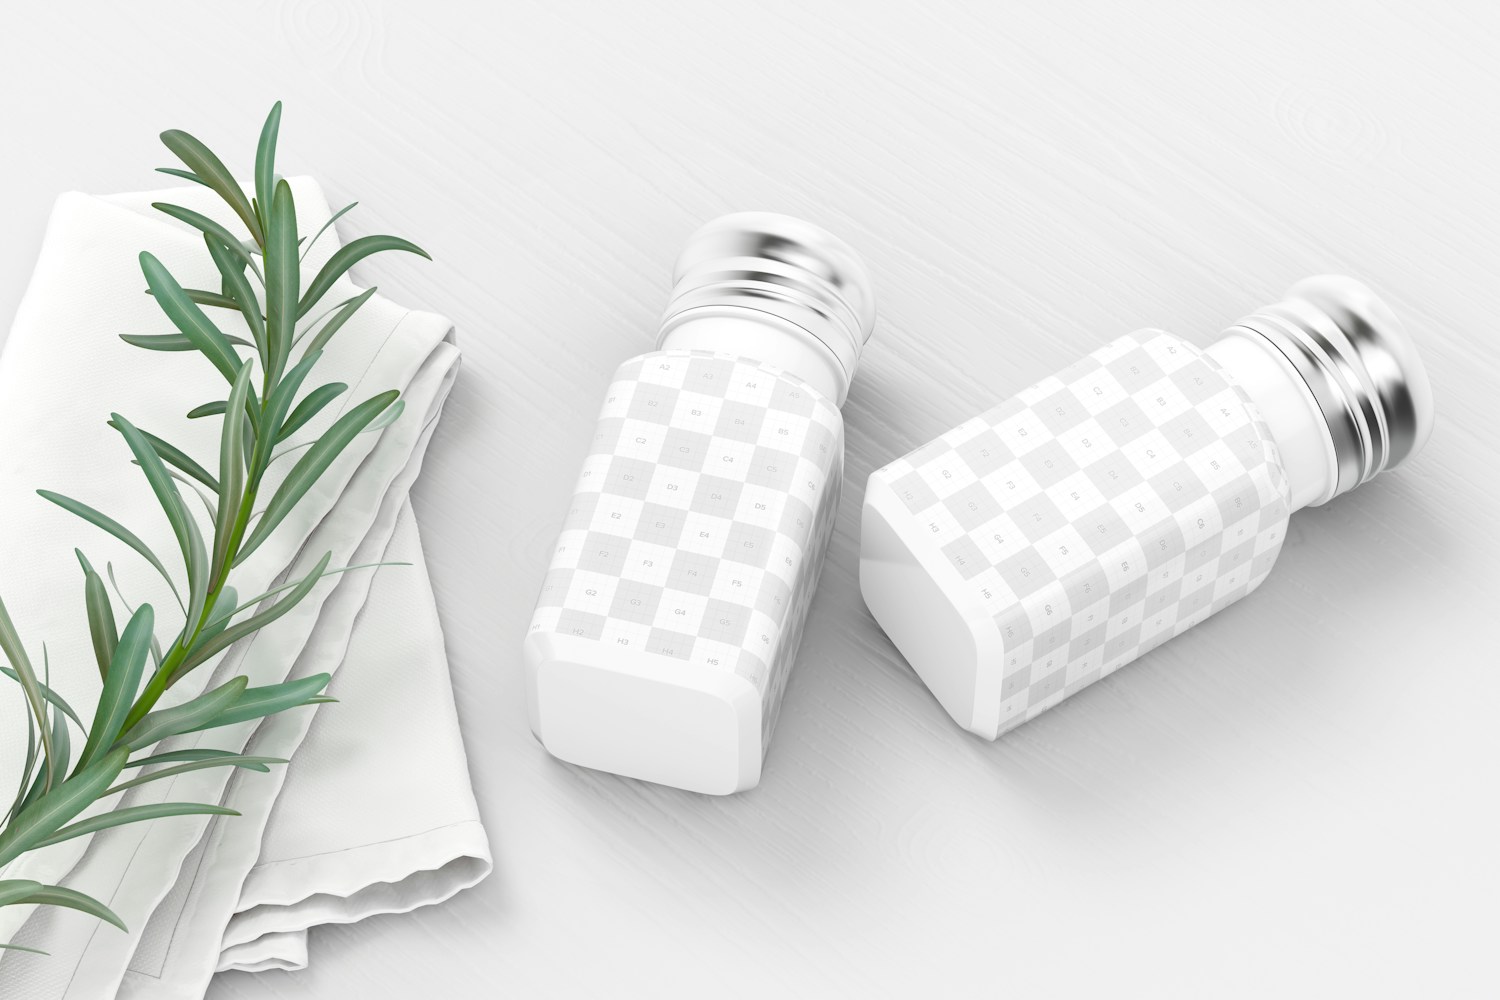 Glass Salt and Pepper Shakers Mockup, Perspective